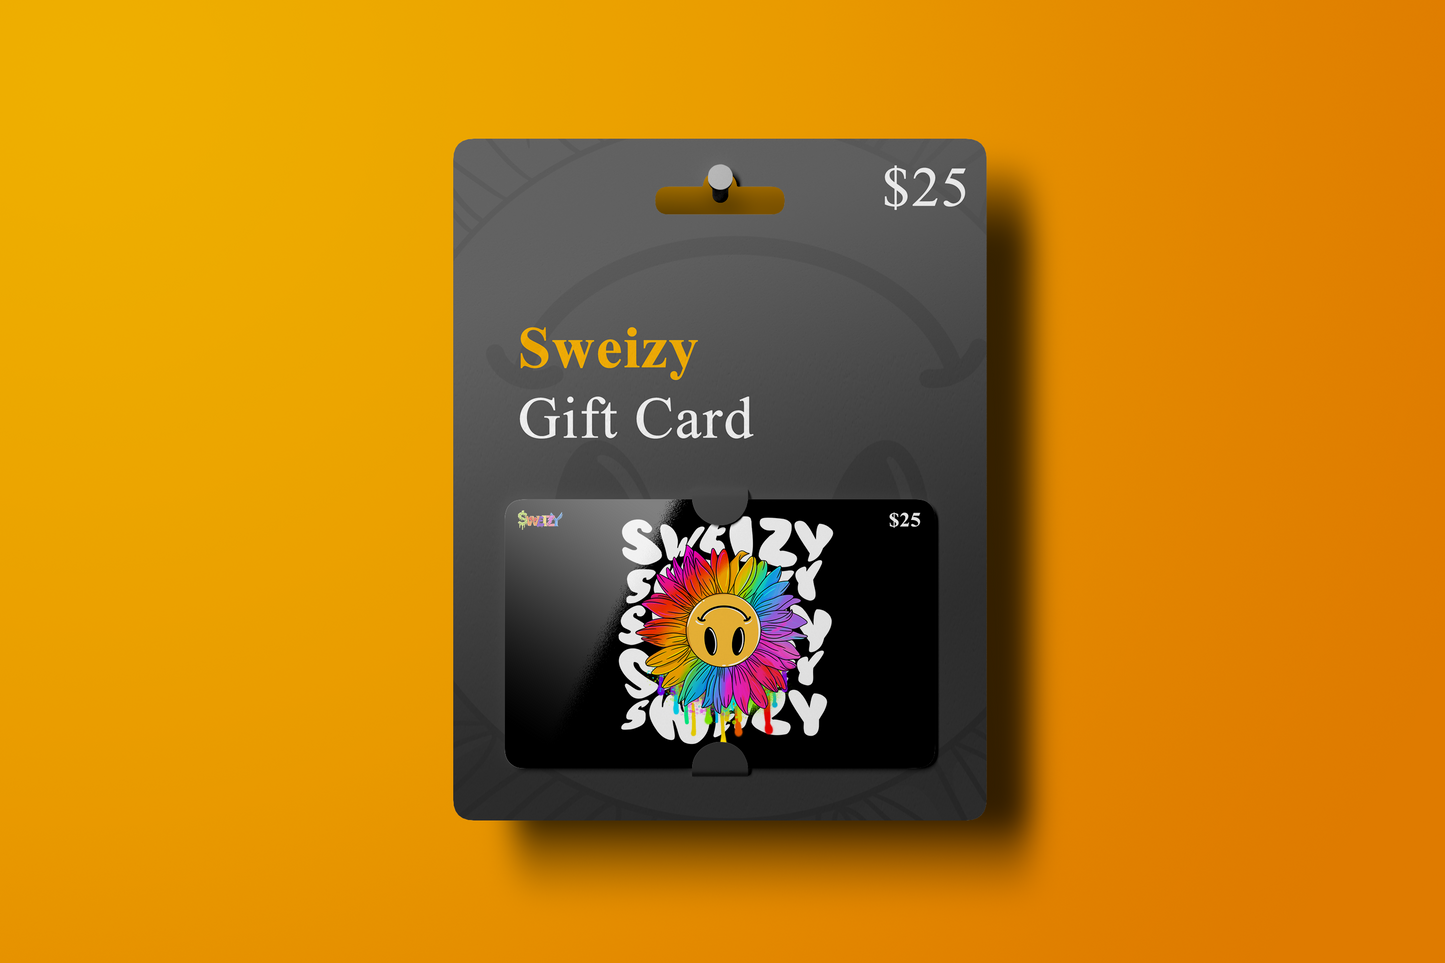 Sweizy Gift Cards